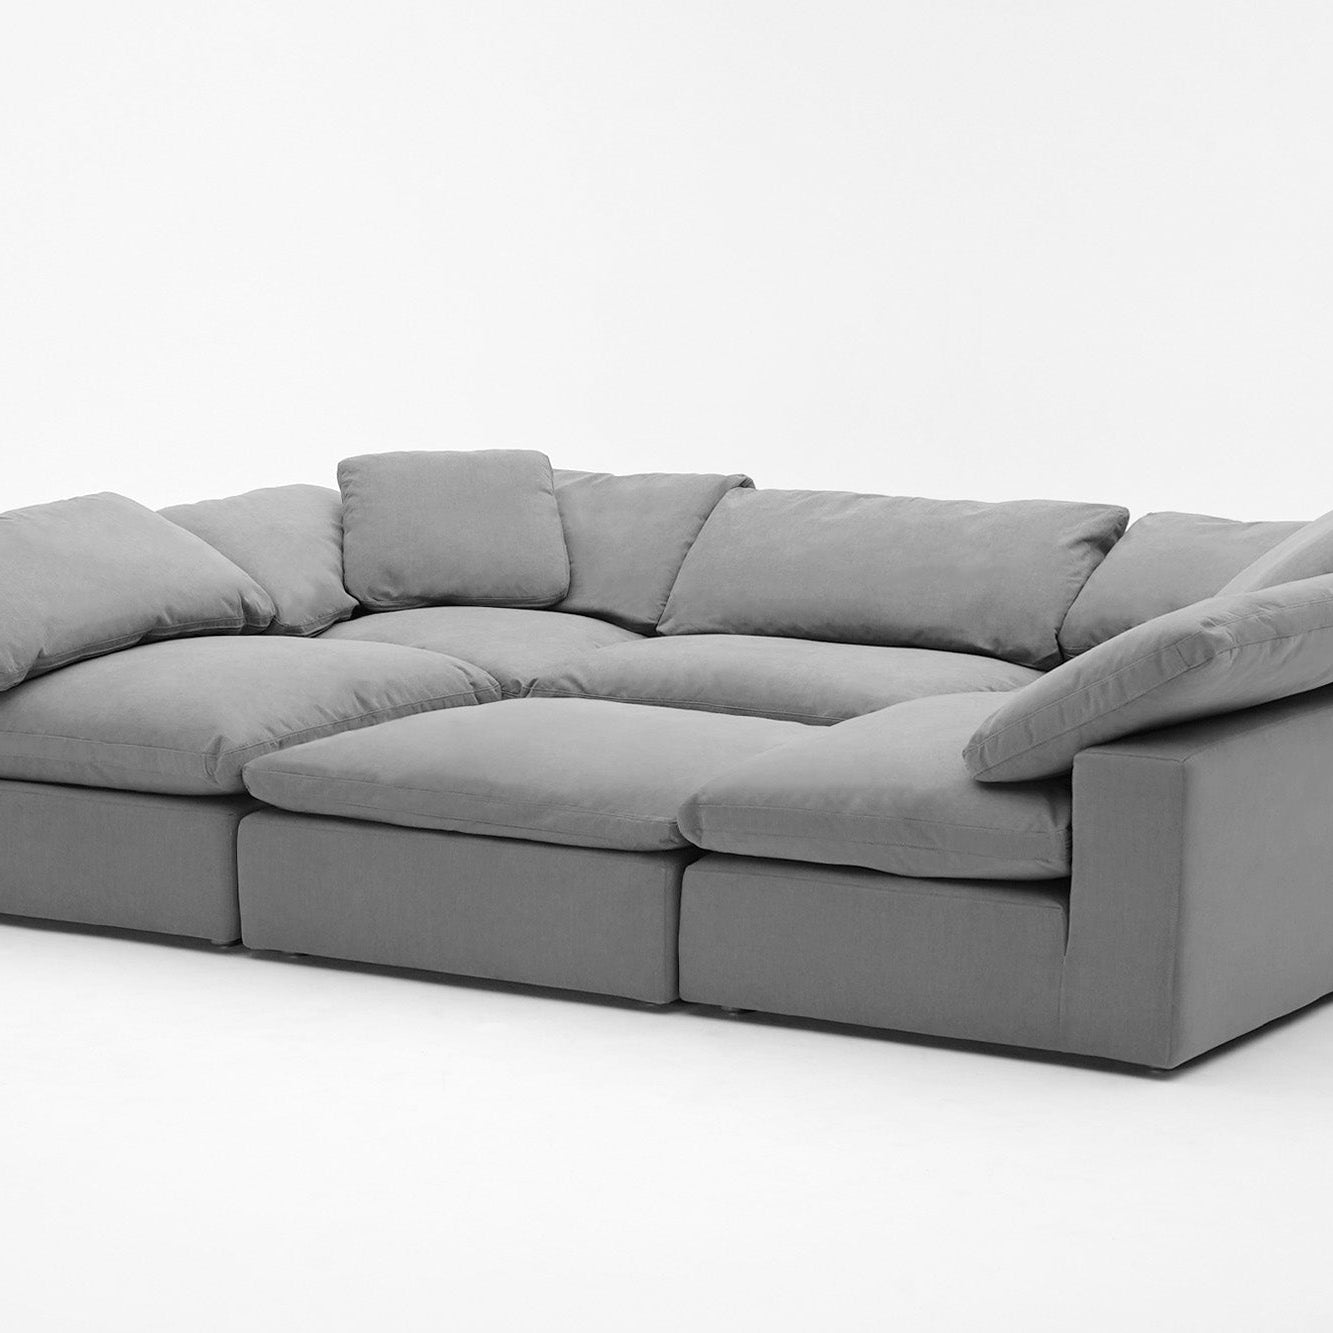 6 Cube Movie Pit or Large Sectional-Soulfa Home